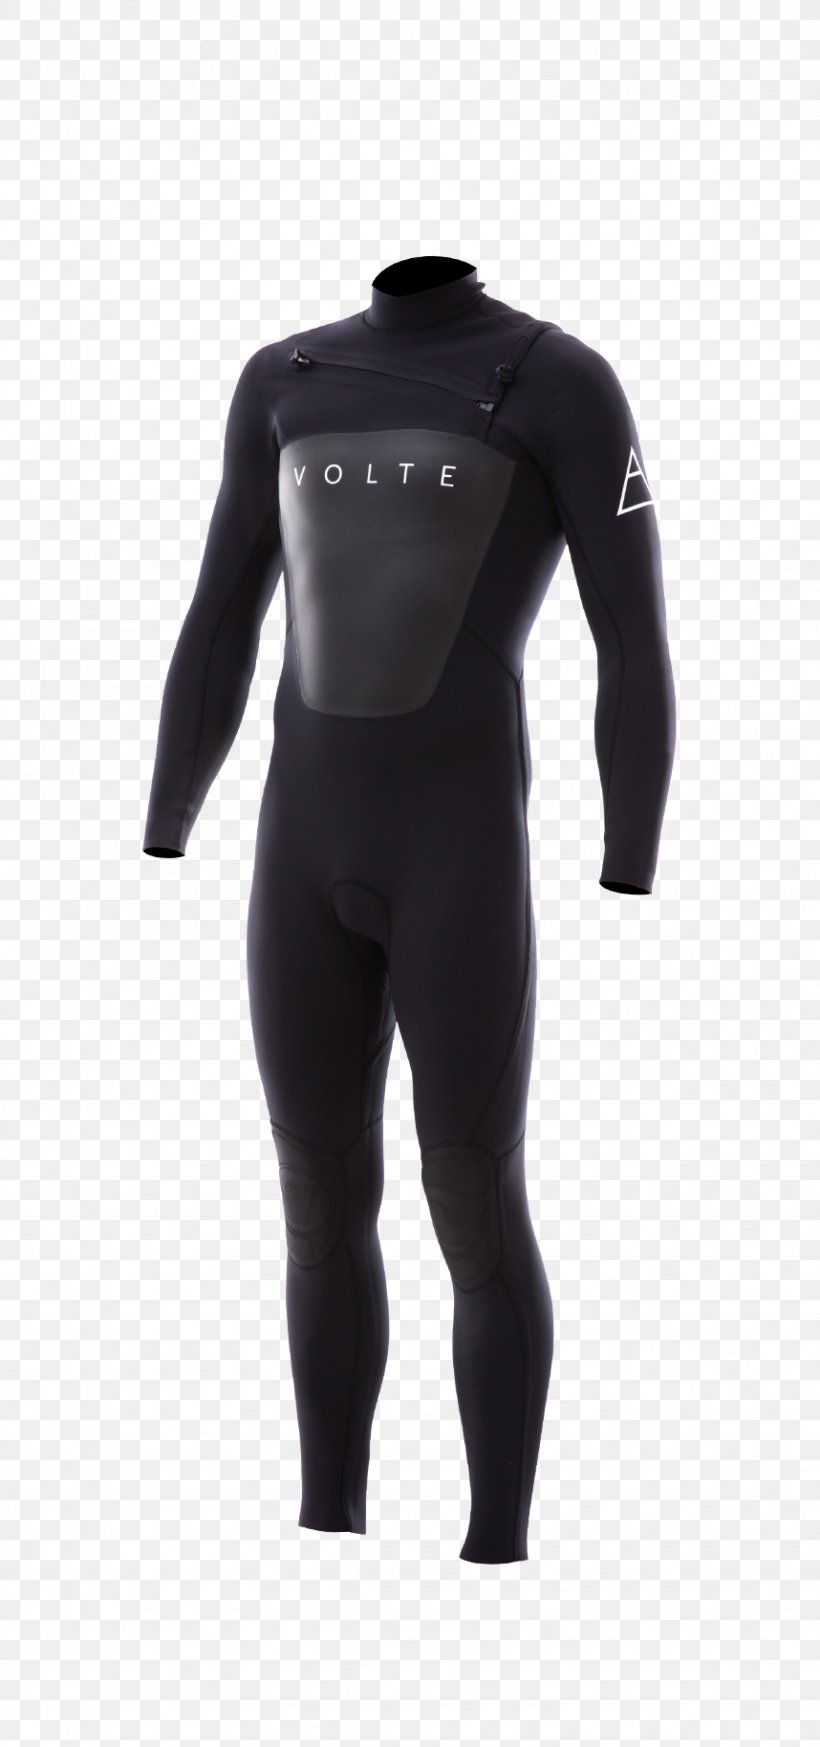 Wetsuit Surfing T-shirt O'Neill Surfwear, PNG, 858x1828px, Wetsuit, Billabong, Dry Suit, Kitesurfing, Personal Protective Equipment Download Free